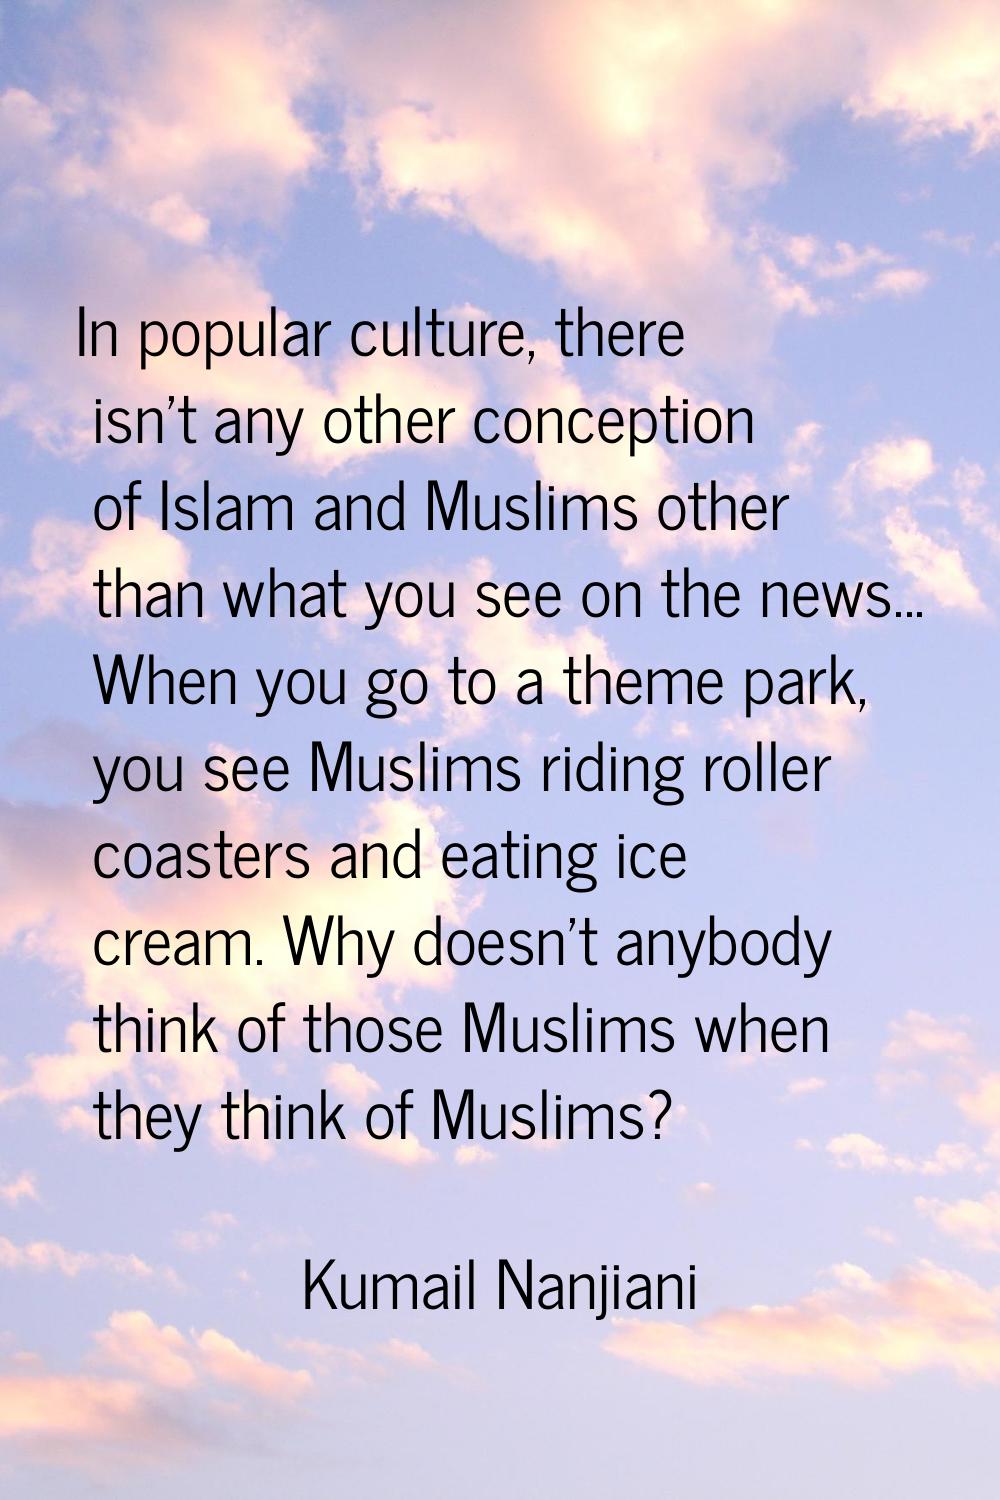 In popular culture, there isn't any other conception of Islam and Muslims other than what you see o